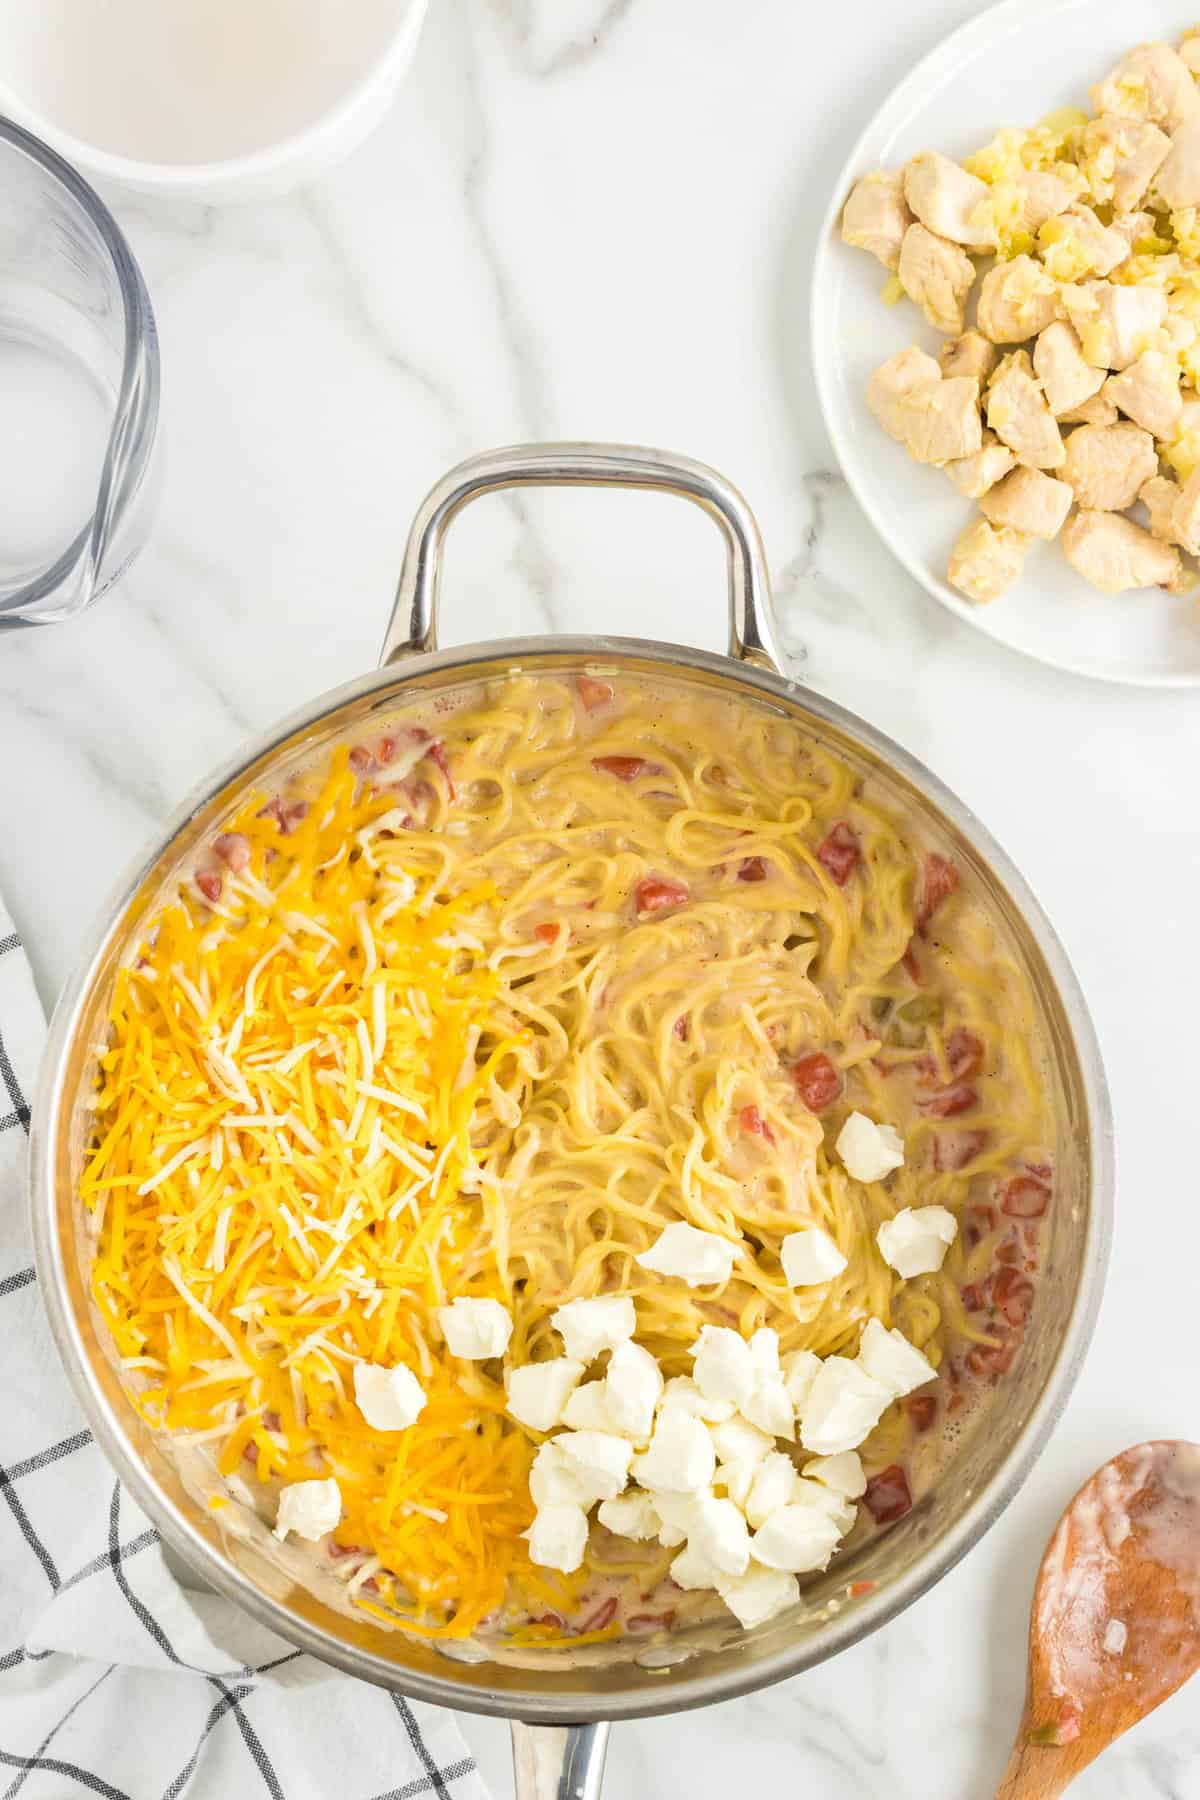 One Pot Chicken Spaghetti Recipe in Stovetop Pot with Cheeses Added